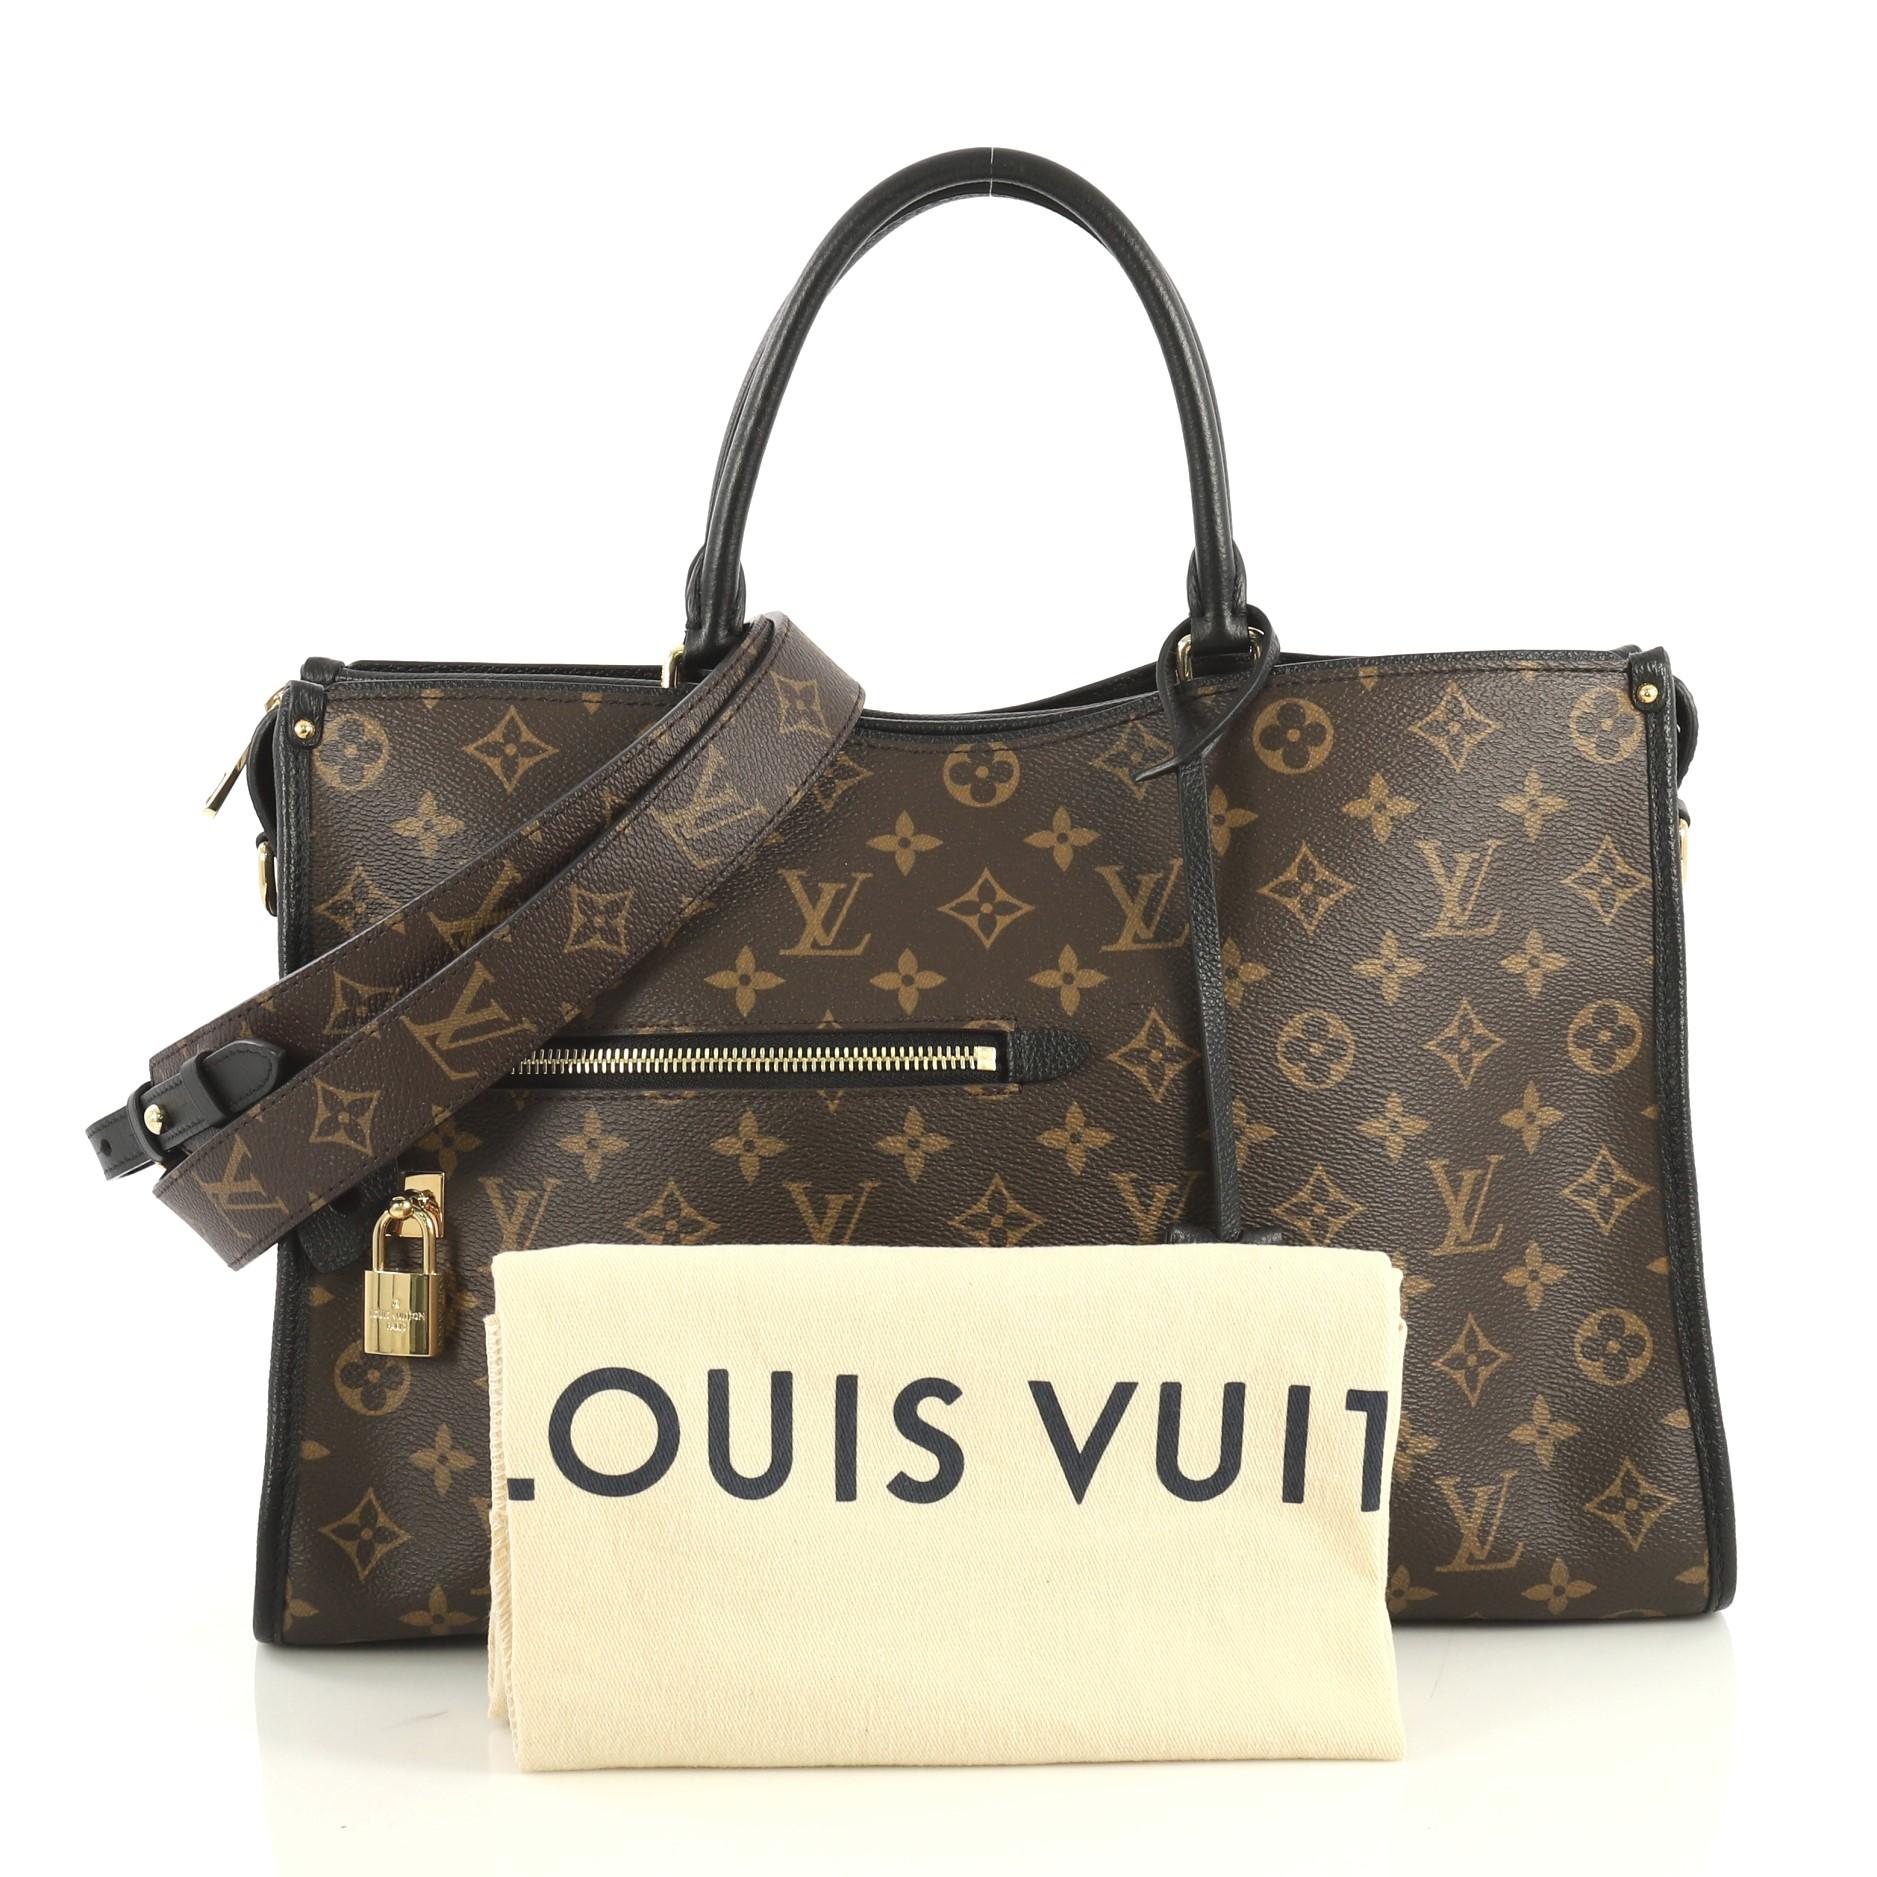 This Louis Vuitton Popincourt NM Handbag Monogram Canvas MM, crafted from brown monogram coated canvas, features dual rolled handles, exterior front zip pocket, two large outside pockets, and gold-tone hardware. Its zip closure opens to a black